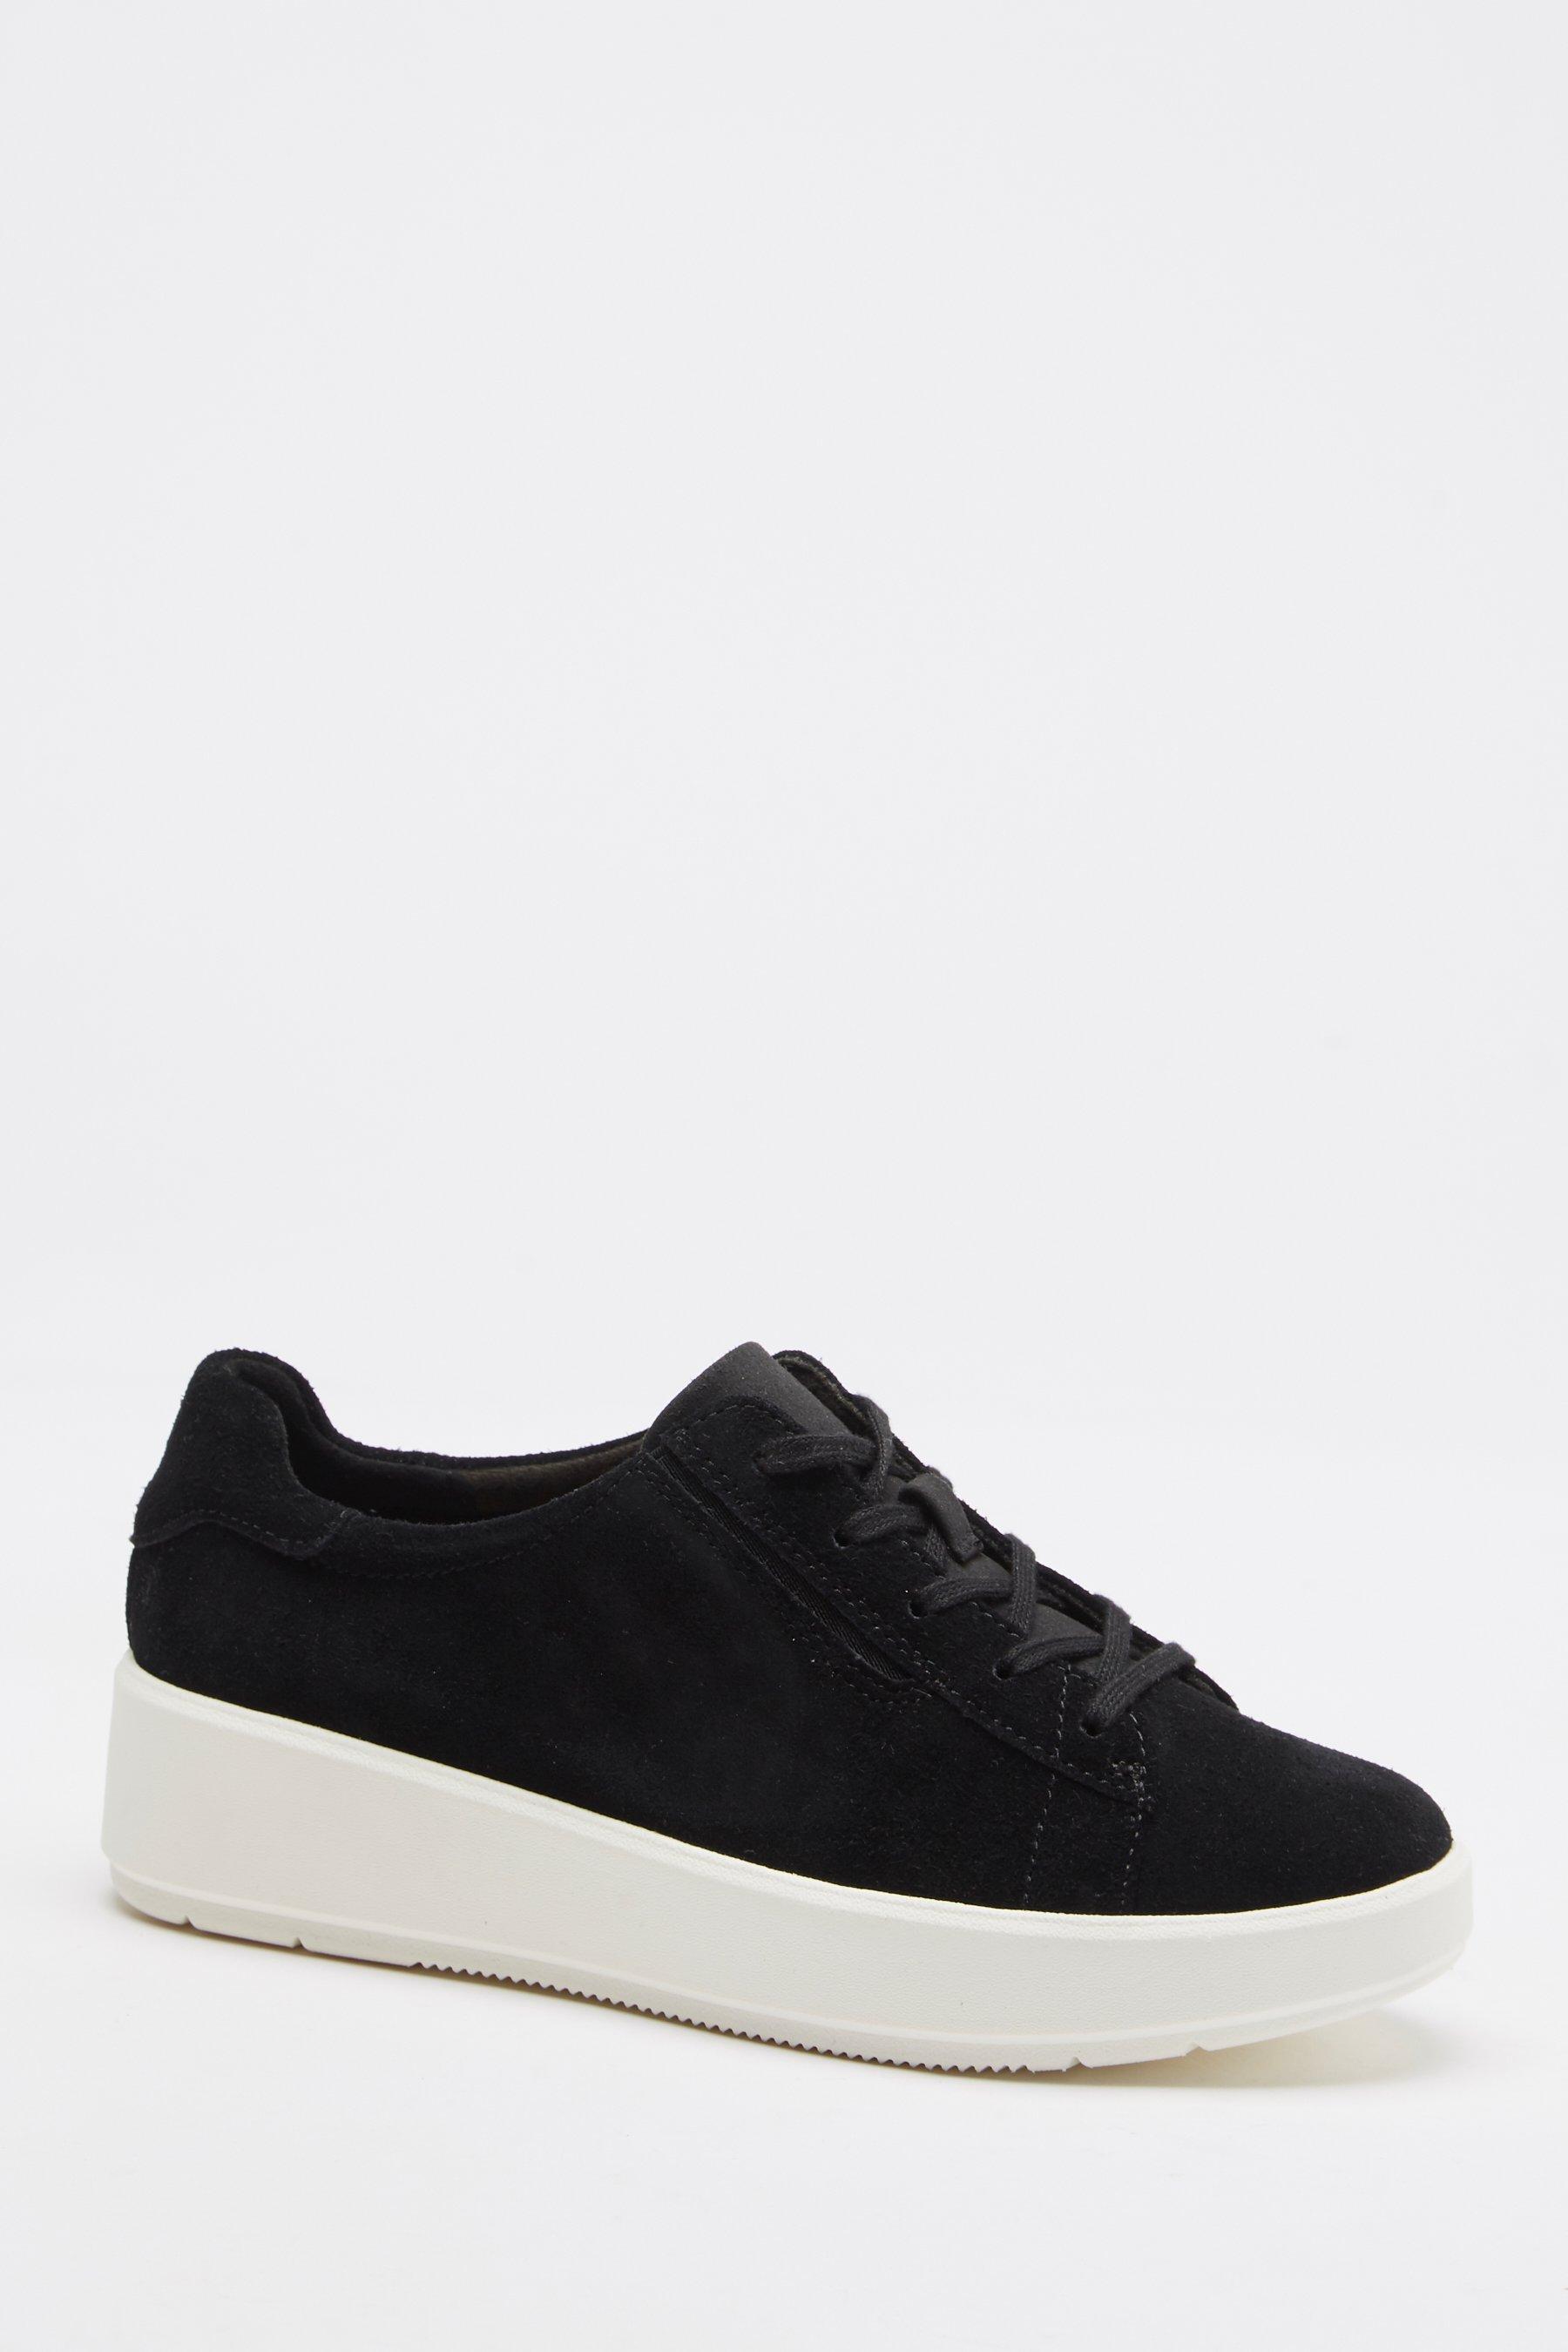 clarks layton lace up trainers - womens - black - size: 4